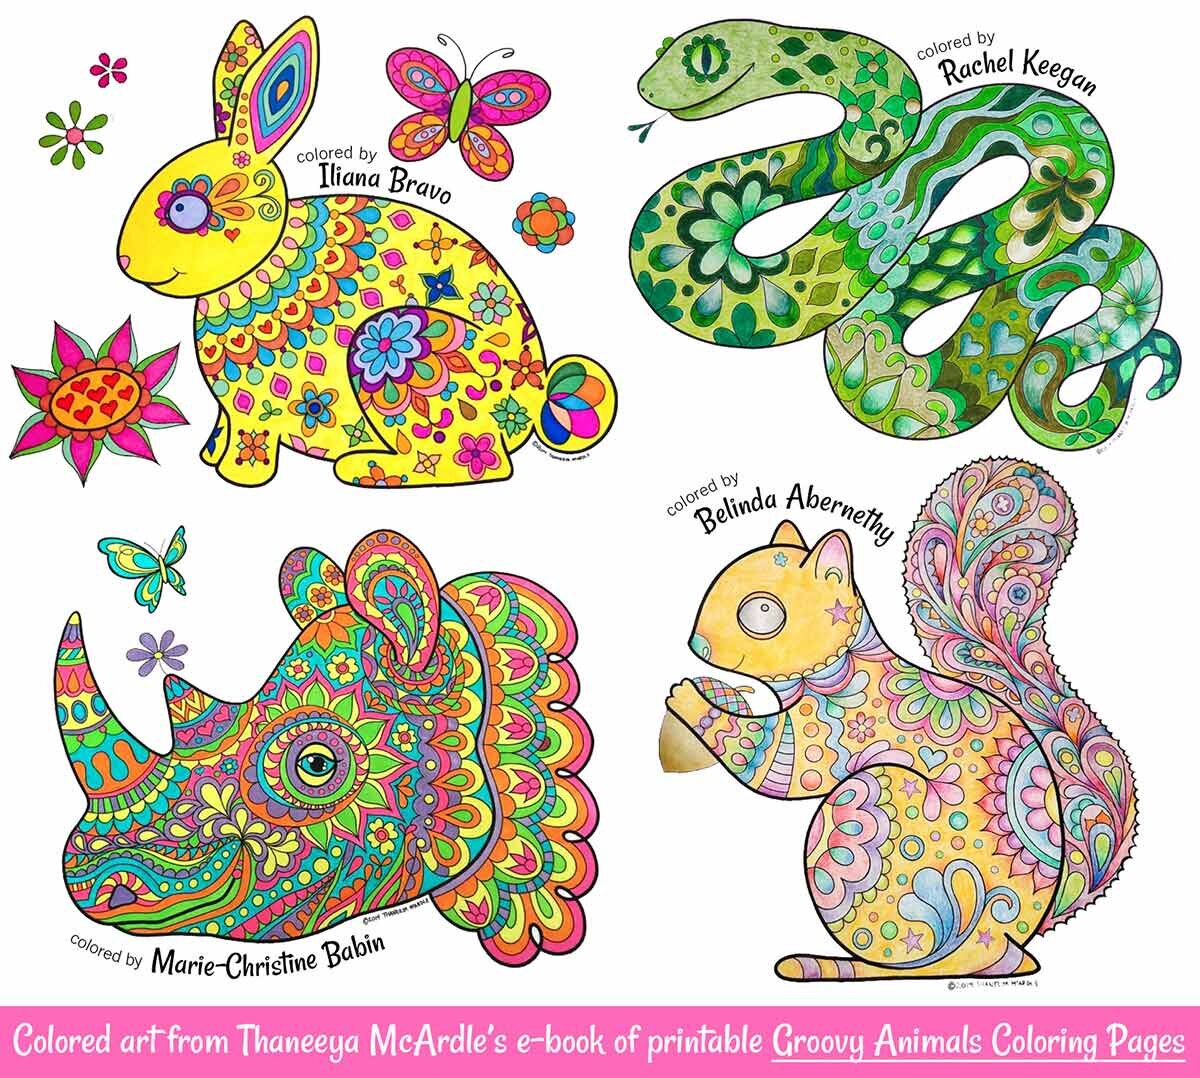 Groovy Animals Coloring Pages   Fun Printable E Book of 20 Detailed Animals  to Color — Art is Fun